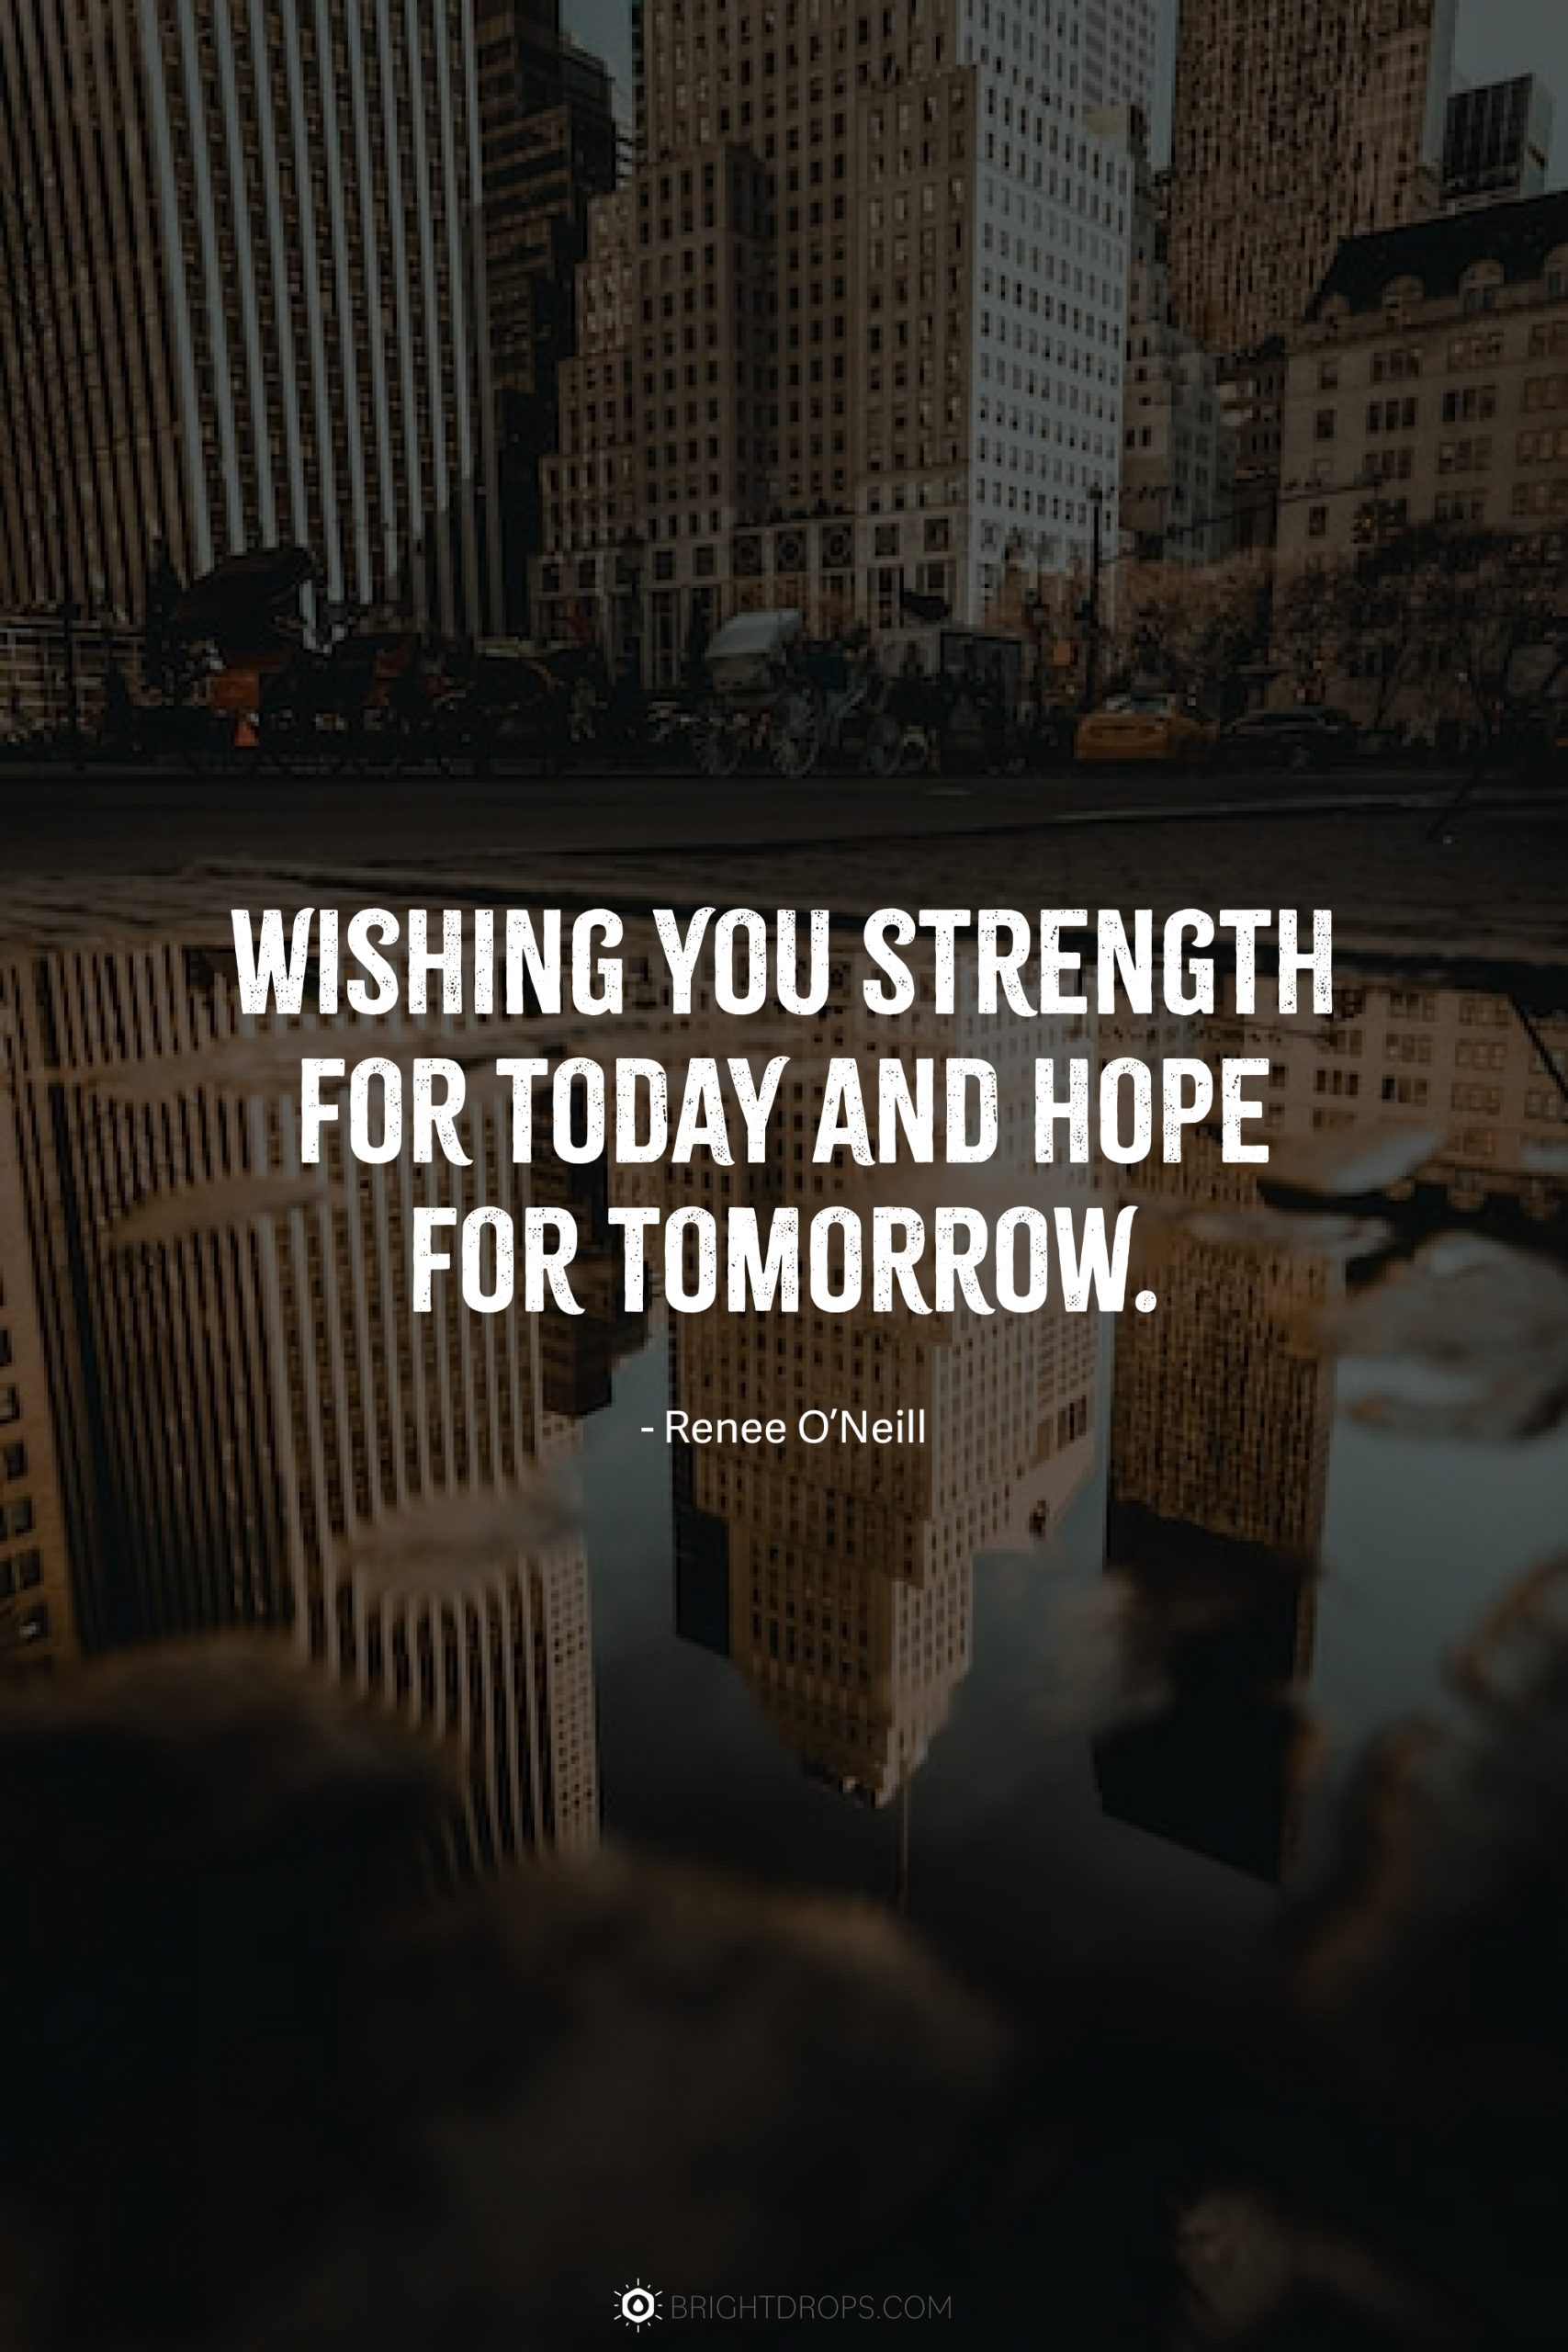 Wishing you strength for today and hope for tomorrow.